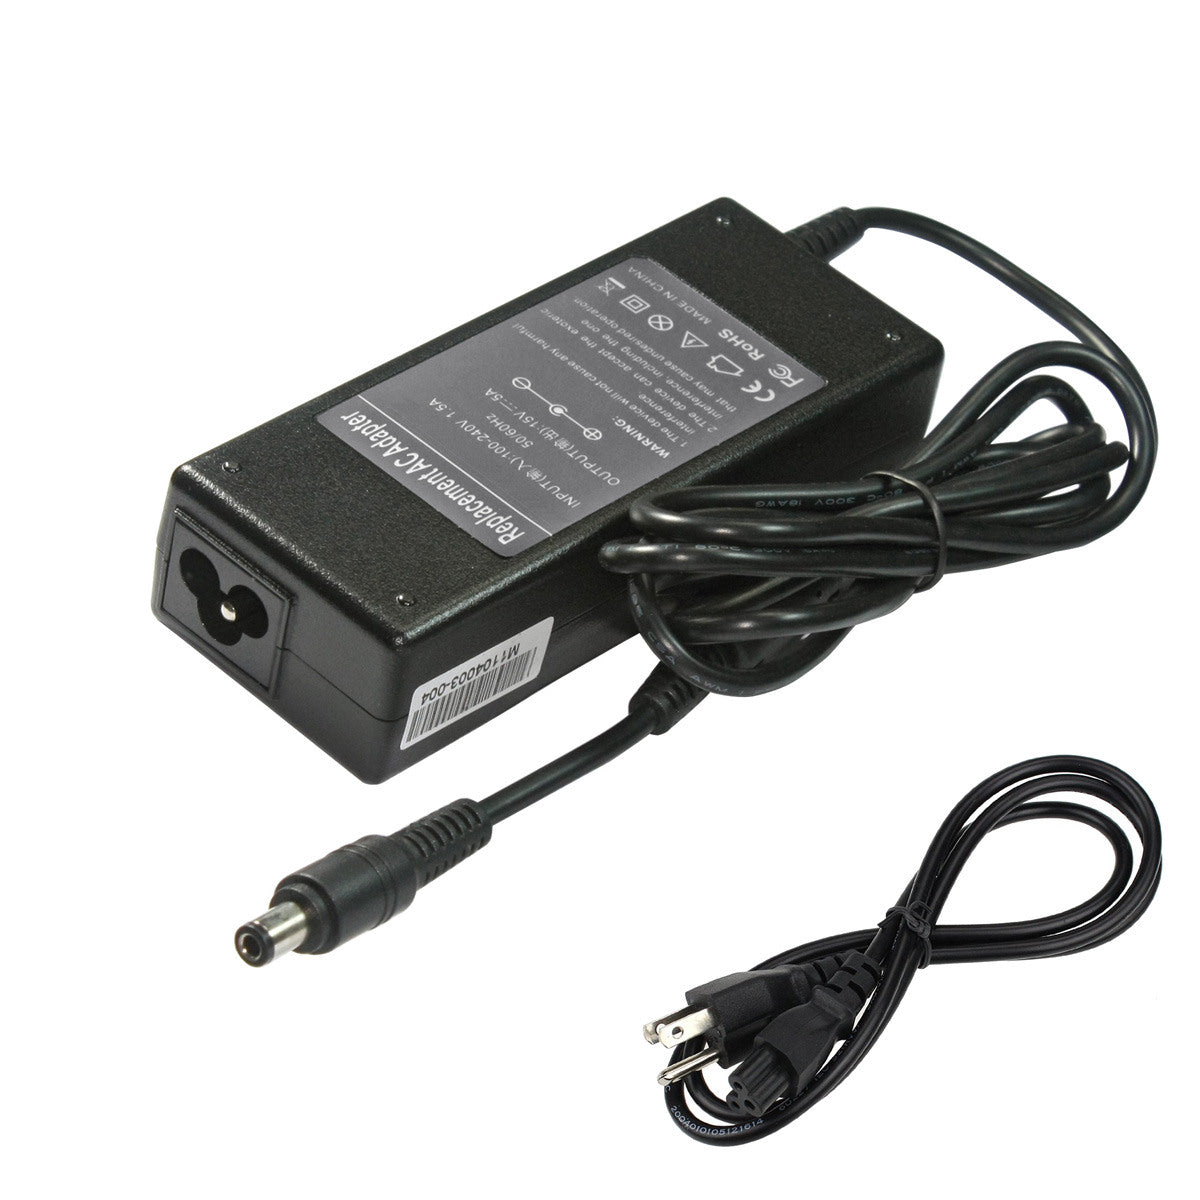 Compatible Replacement Toshiba Satellite PS225U-M91J08 Laptop Charger.